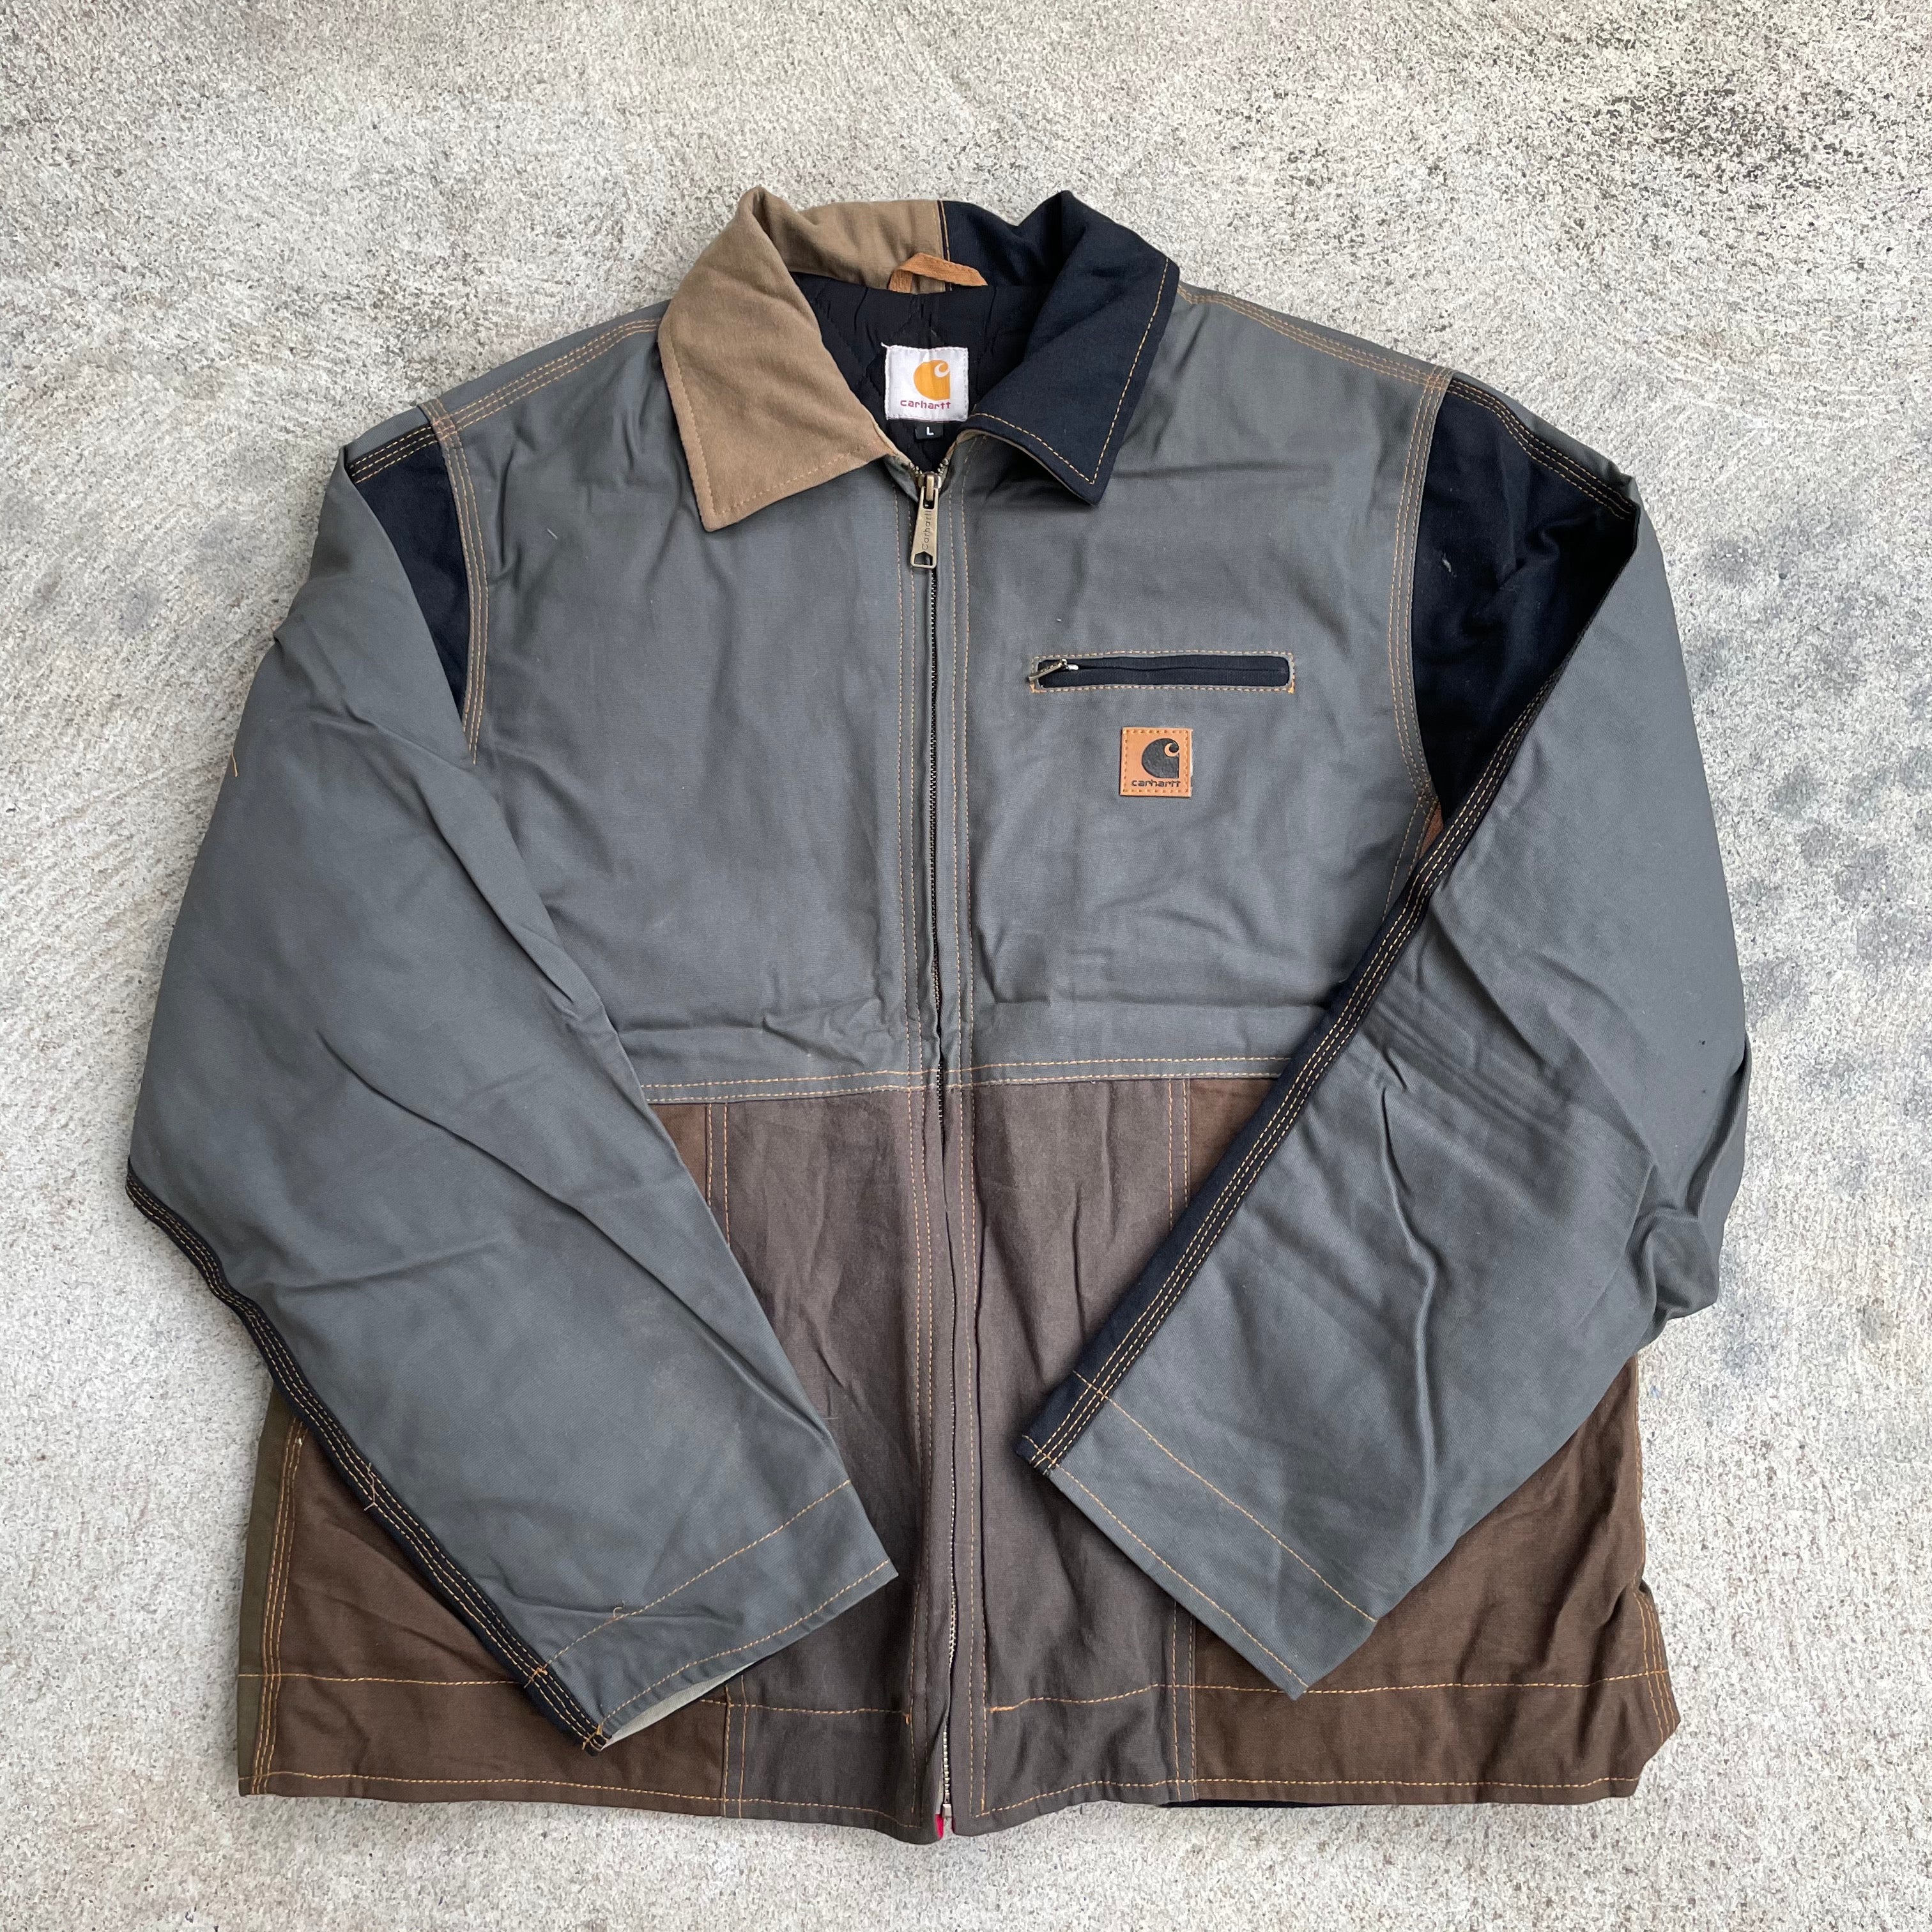 Carhartt Reworked Jacket Quilt Lined Large